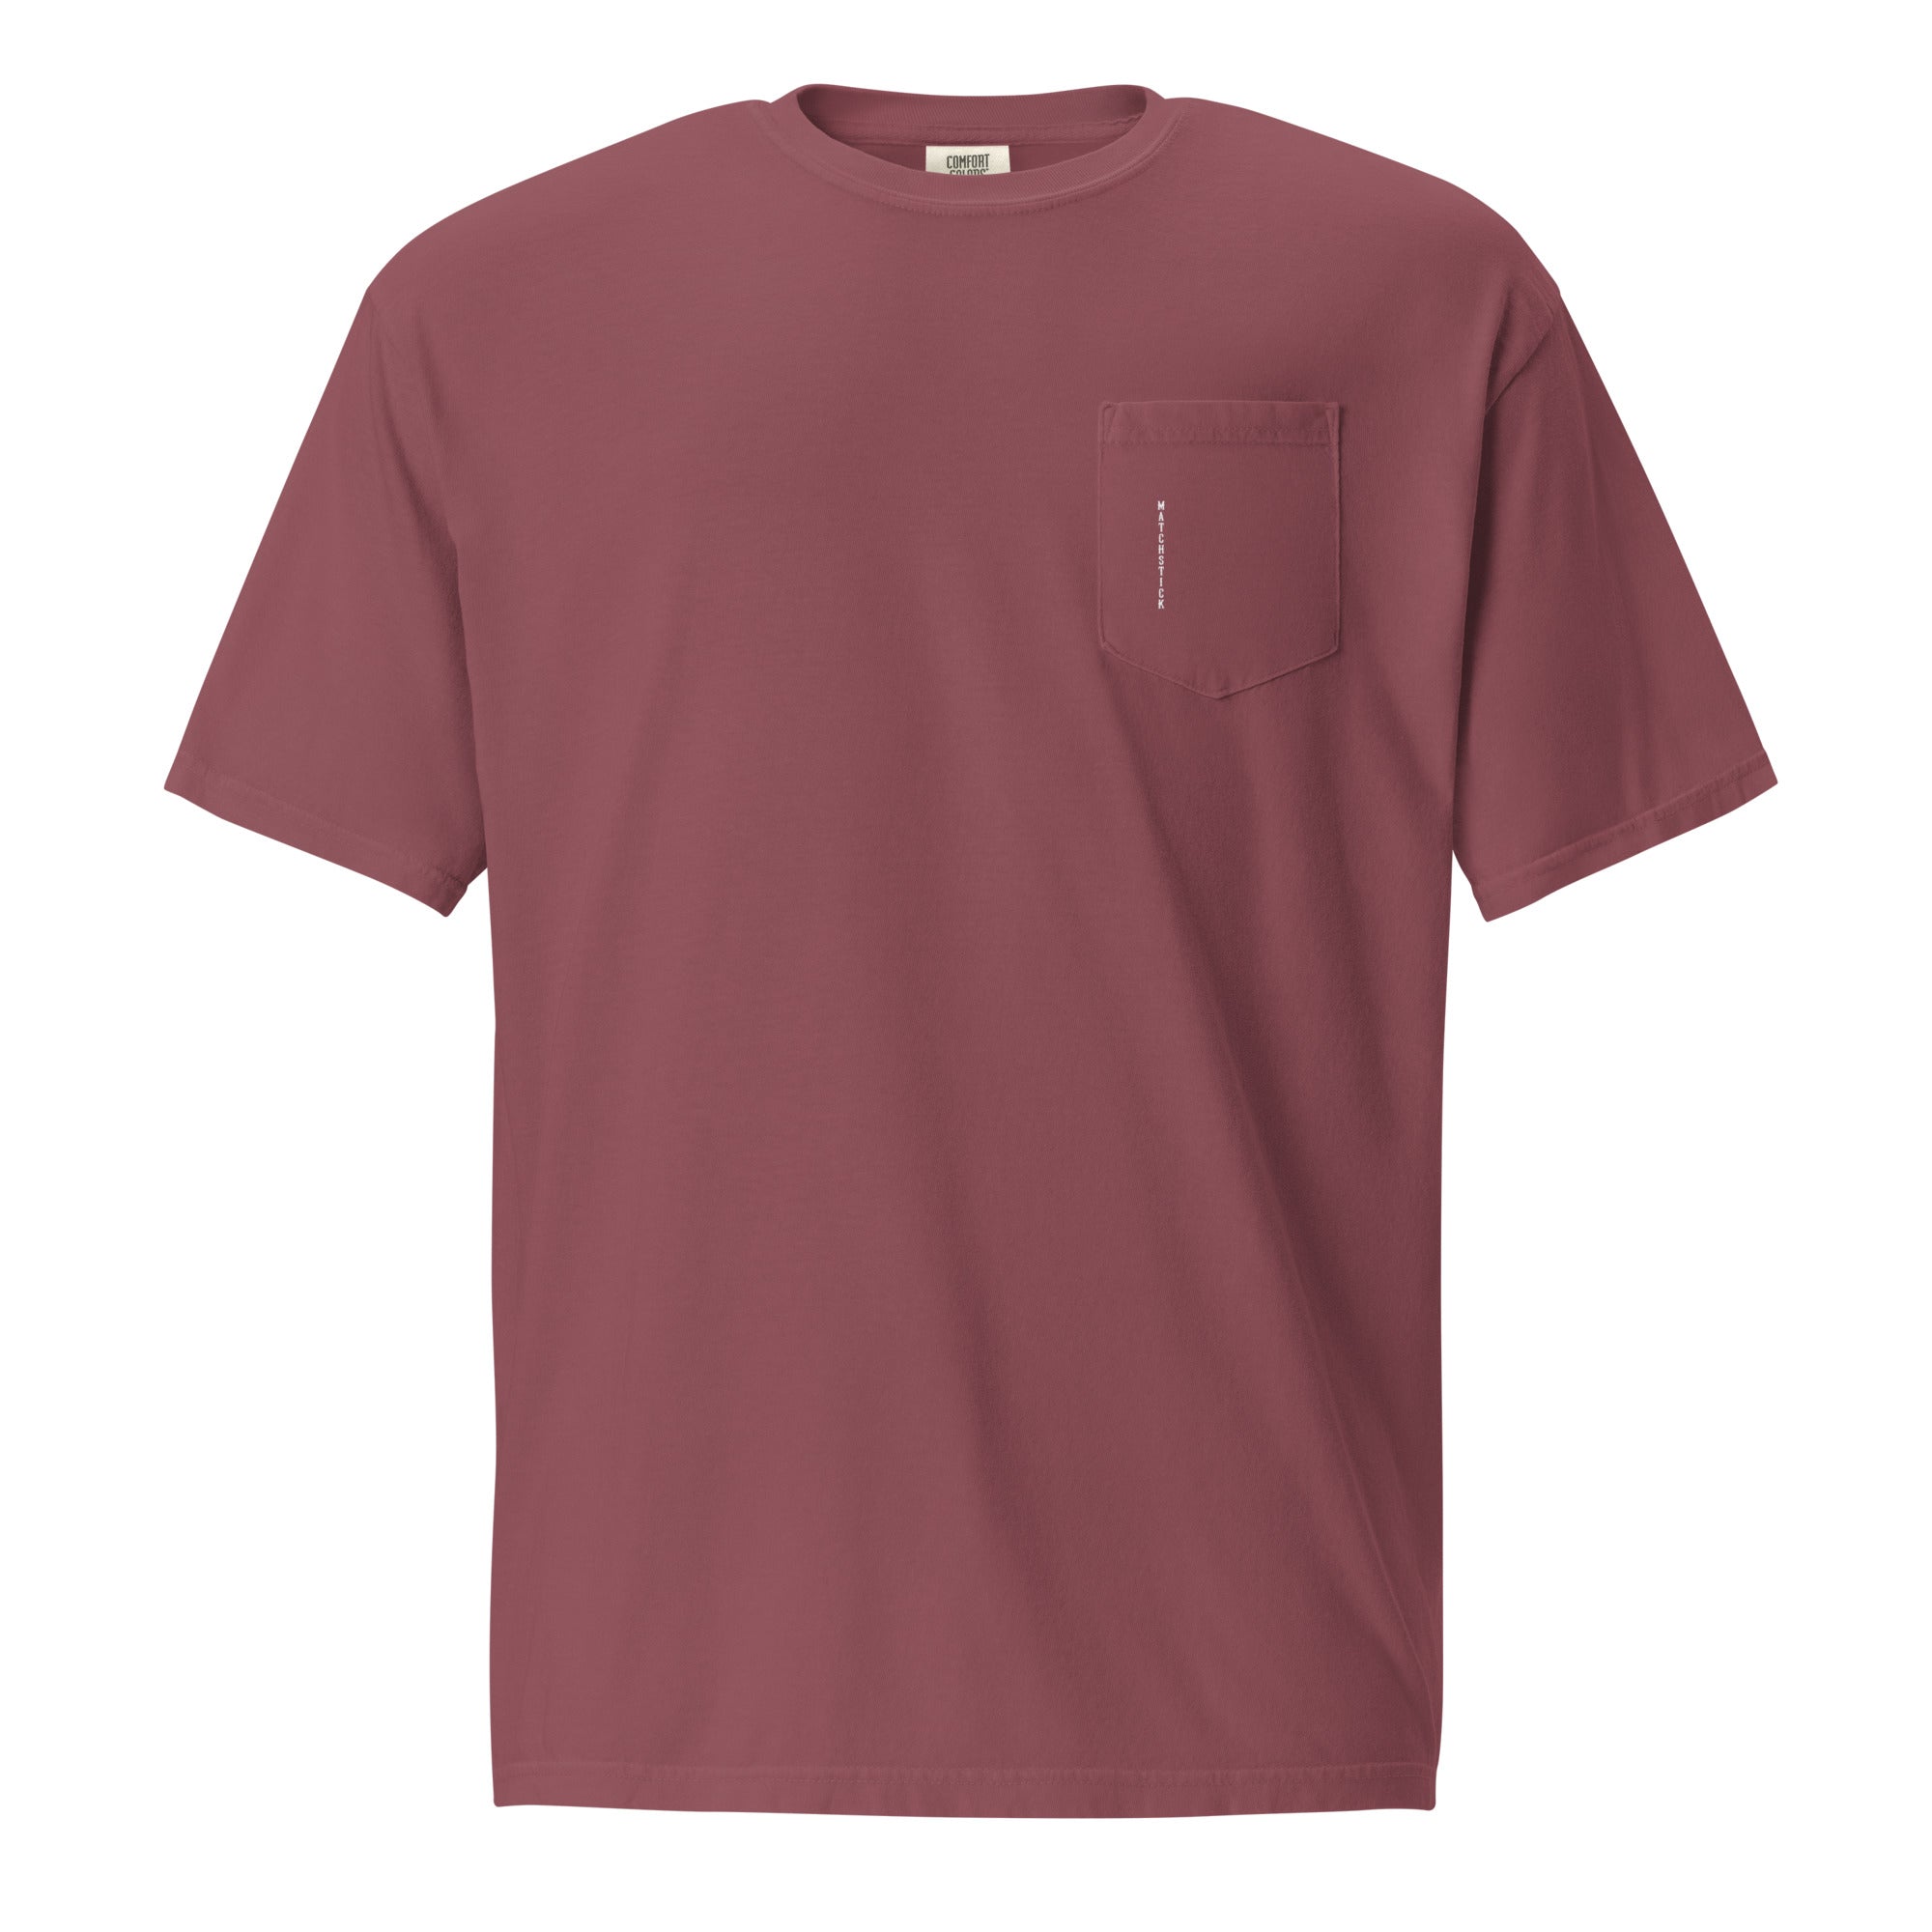 Head for the Hills - Pocket t-shirt Unisex garment-dyed